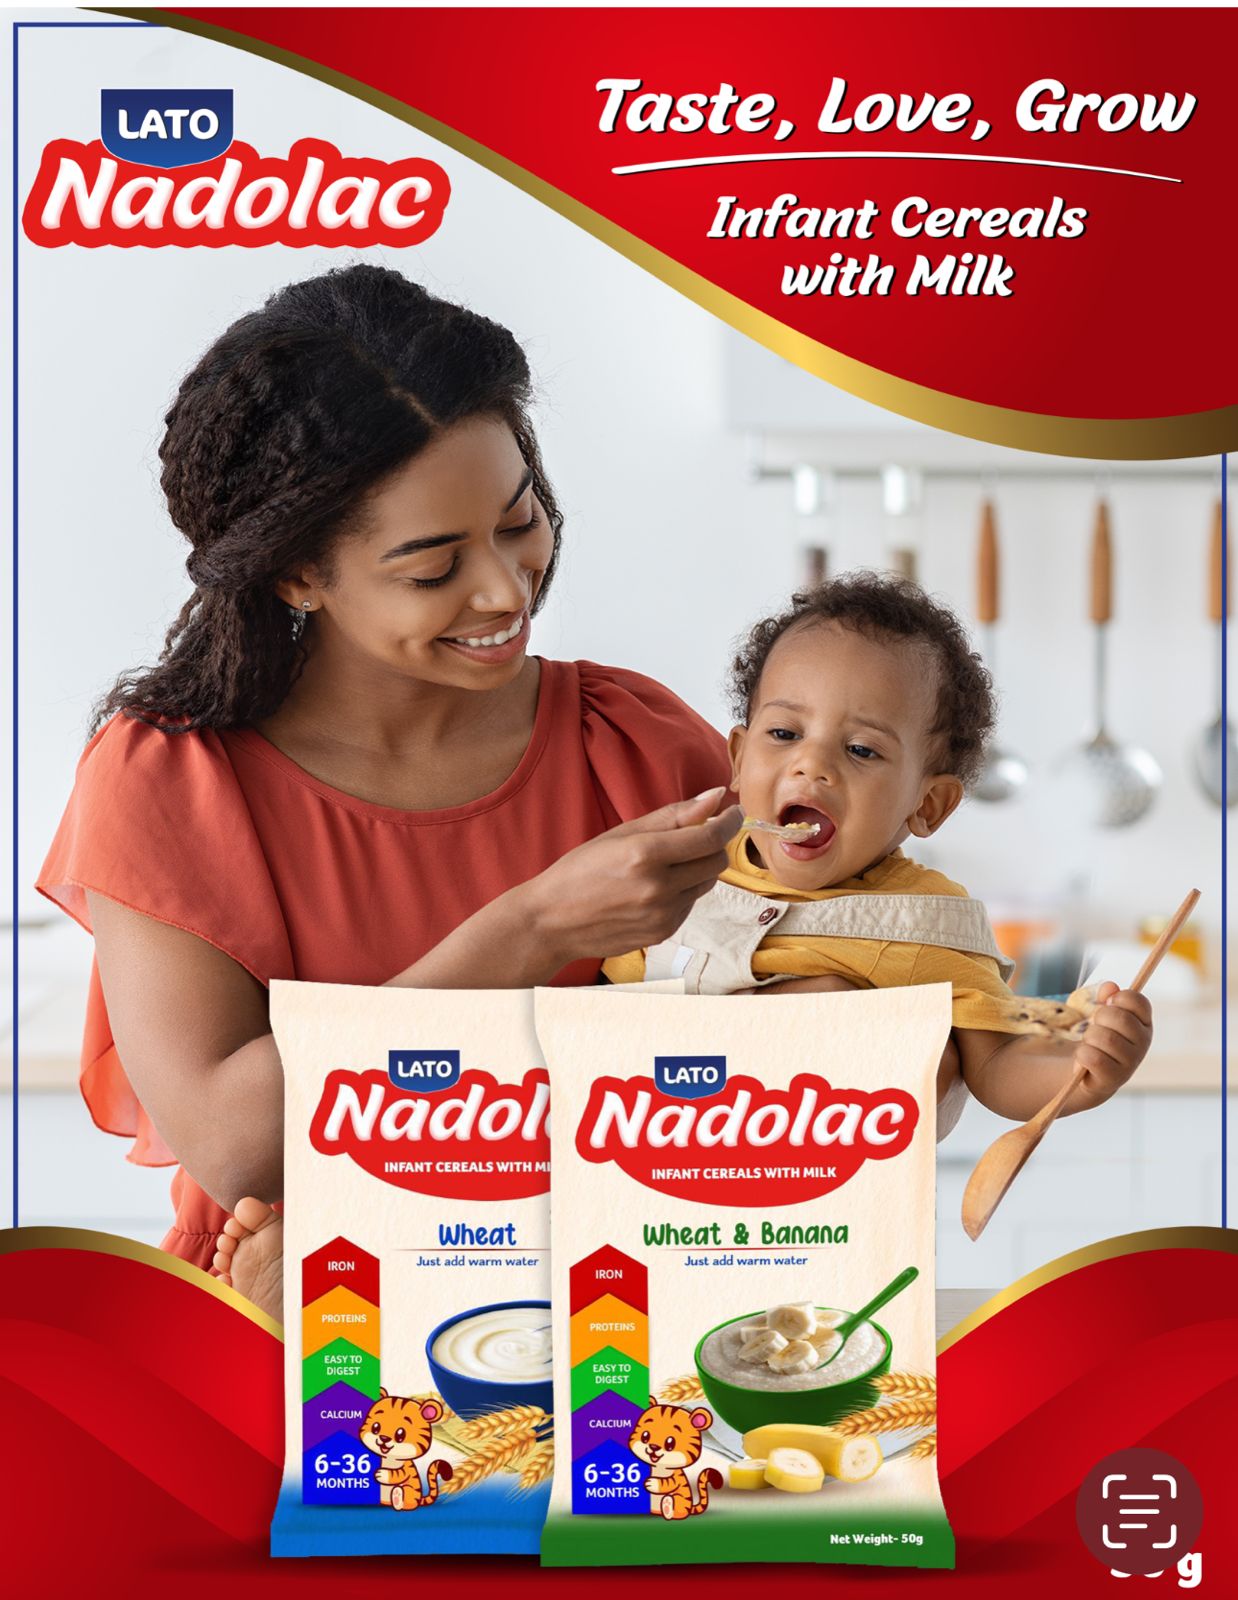 Lato launches solid foods for infants